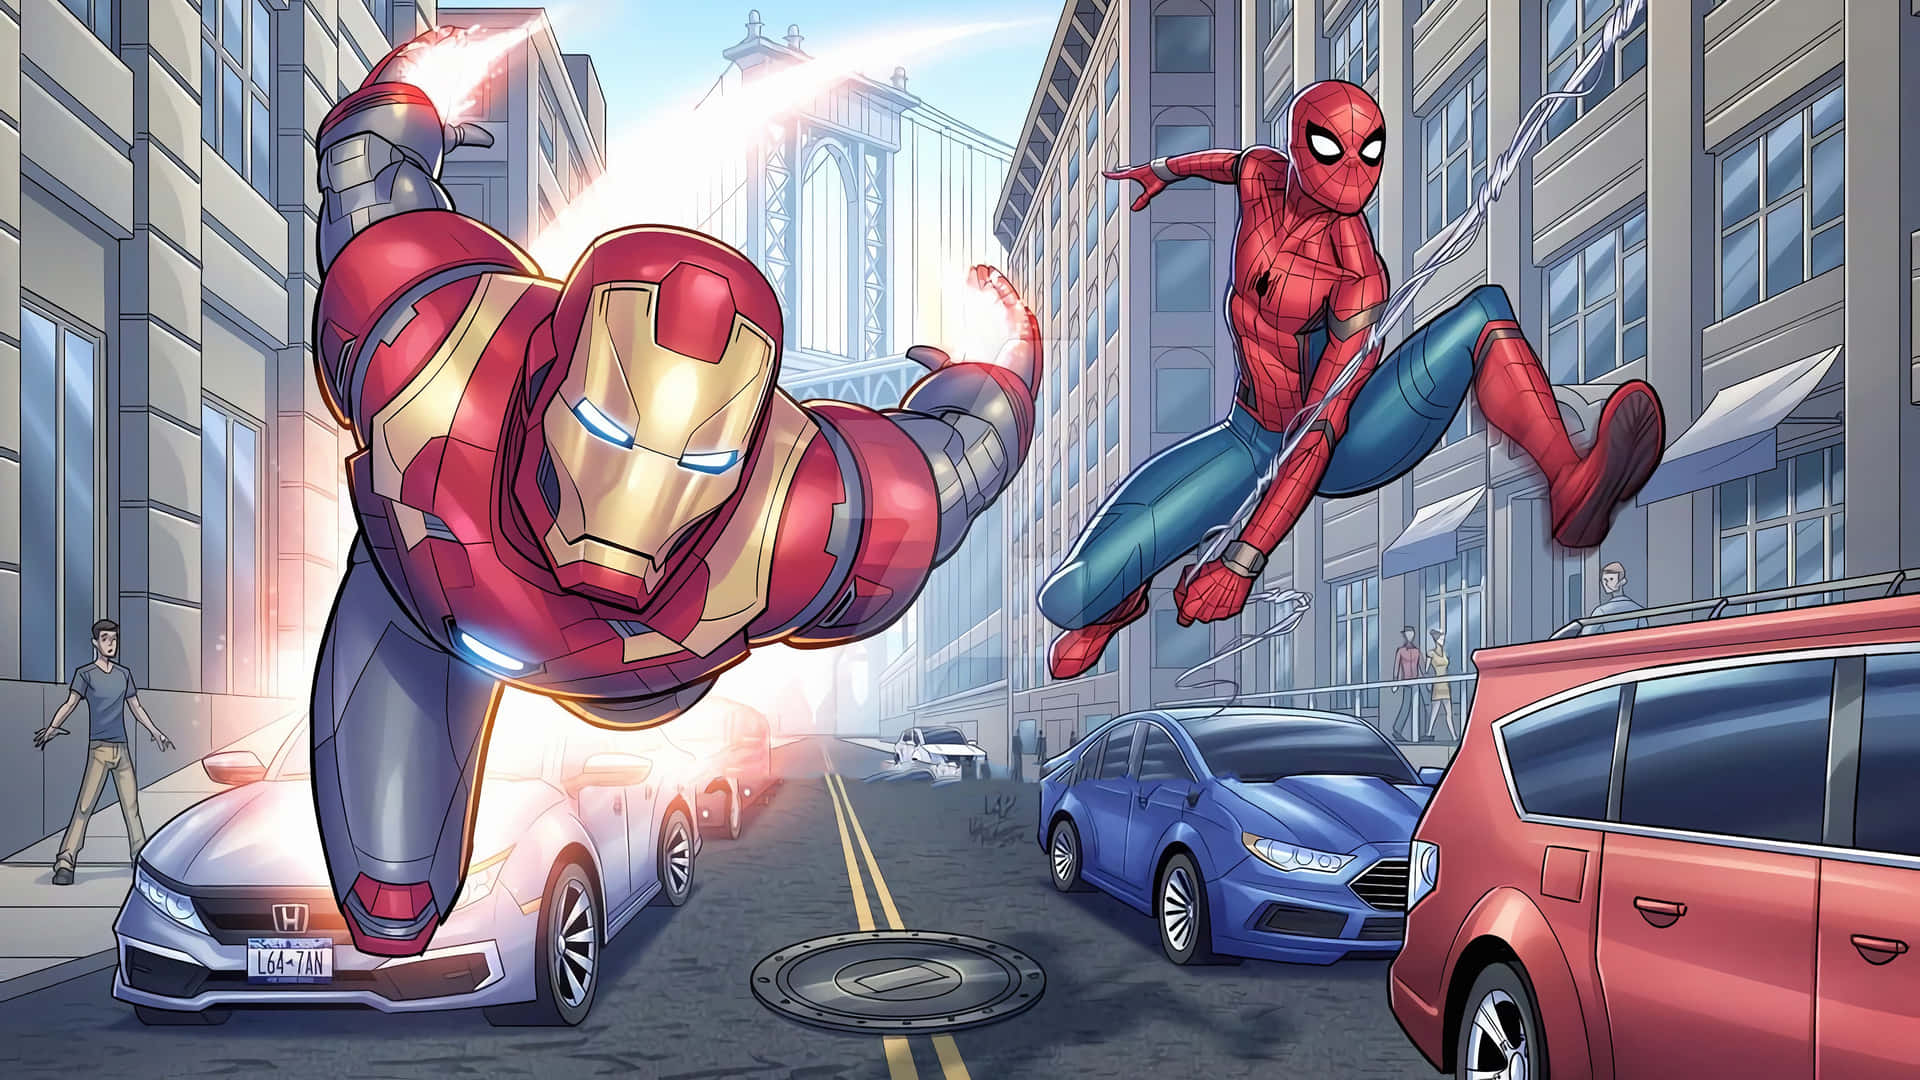 Assemble! Spider Man and Iron Man join forces to fight evil. Wallpaper